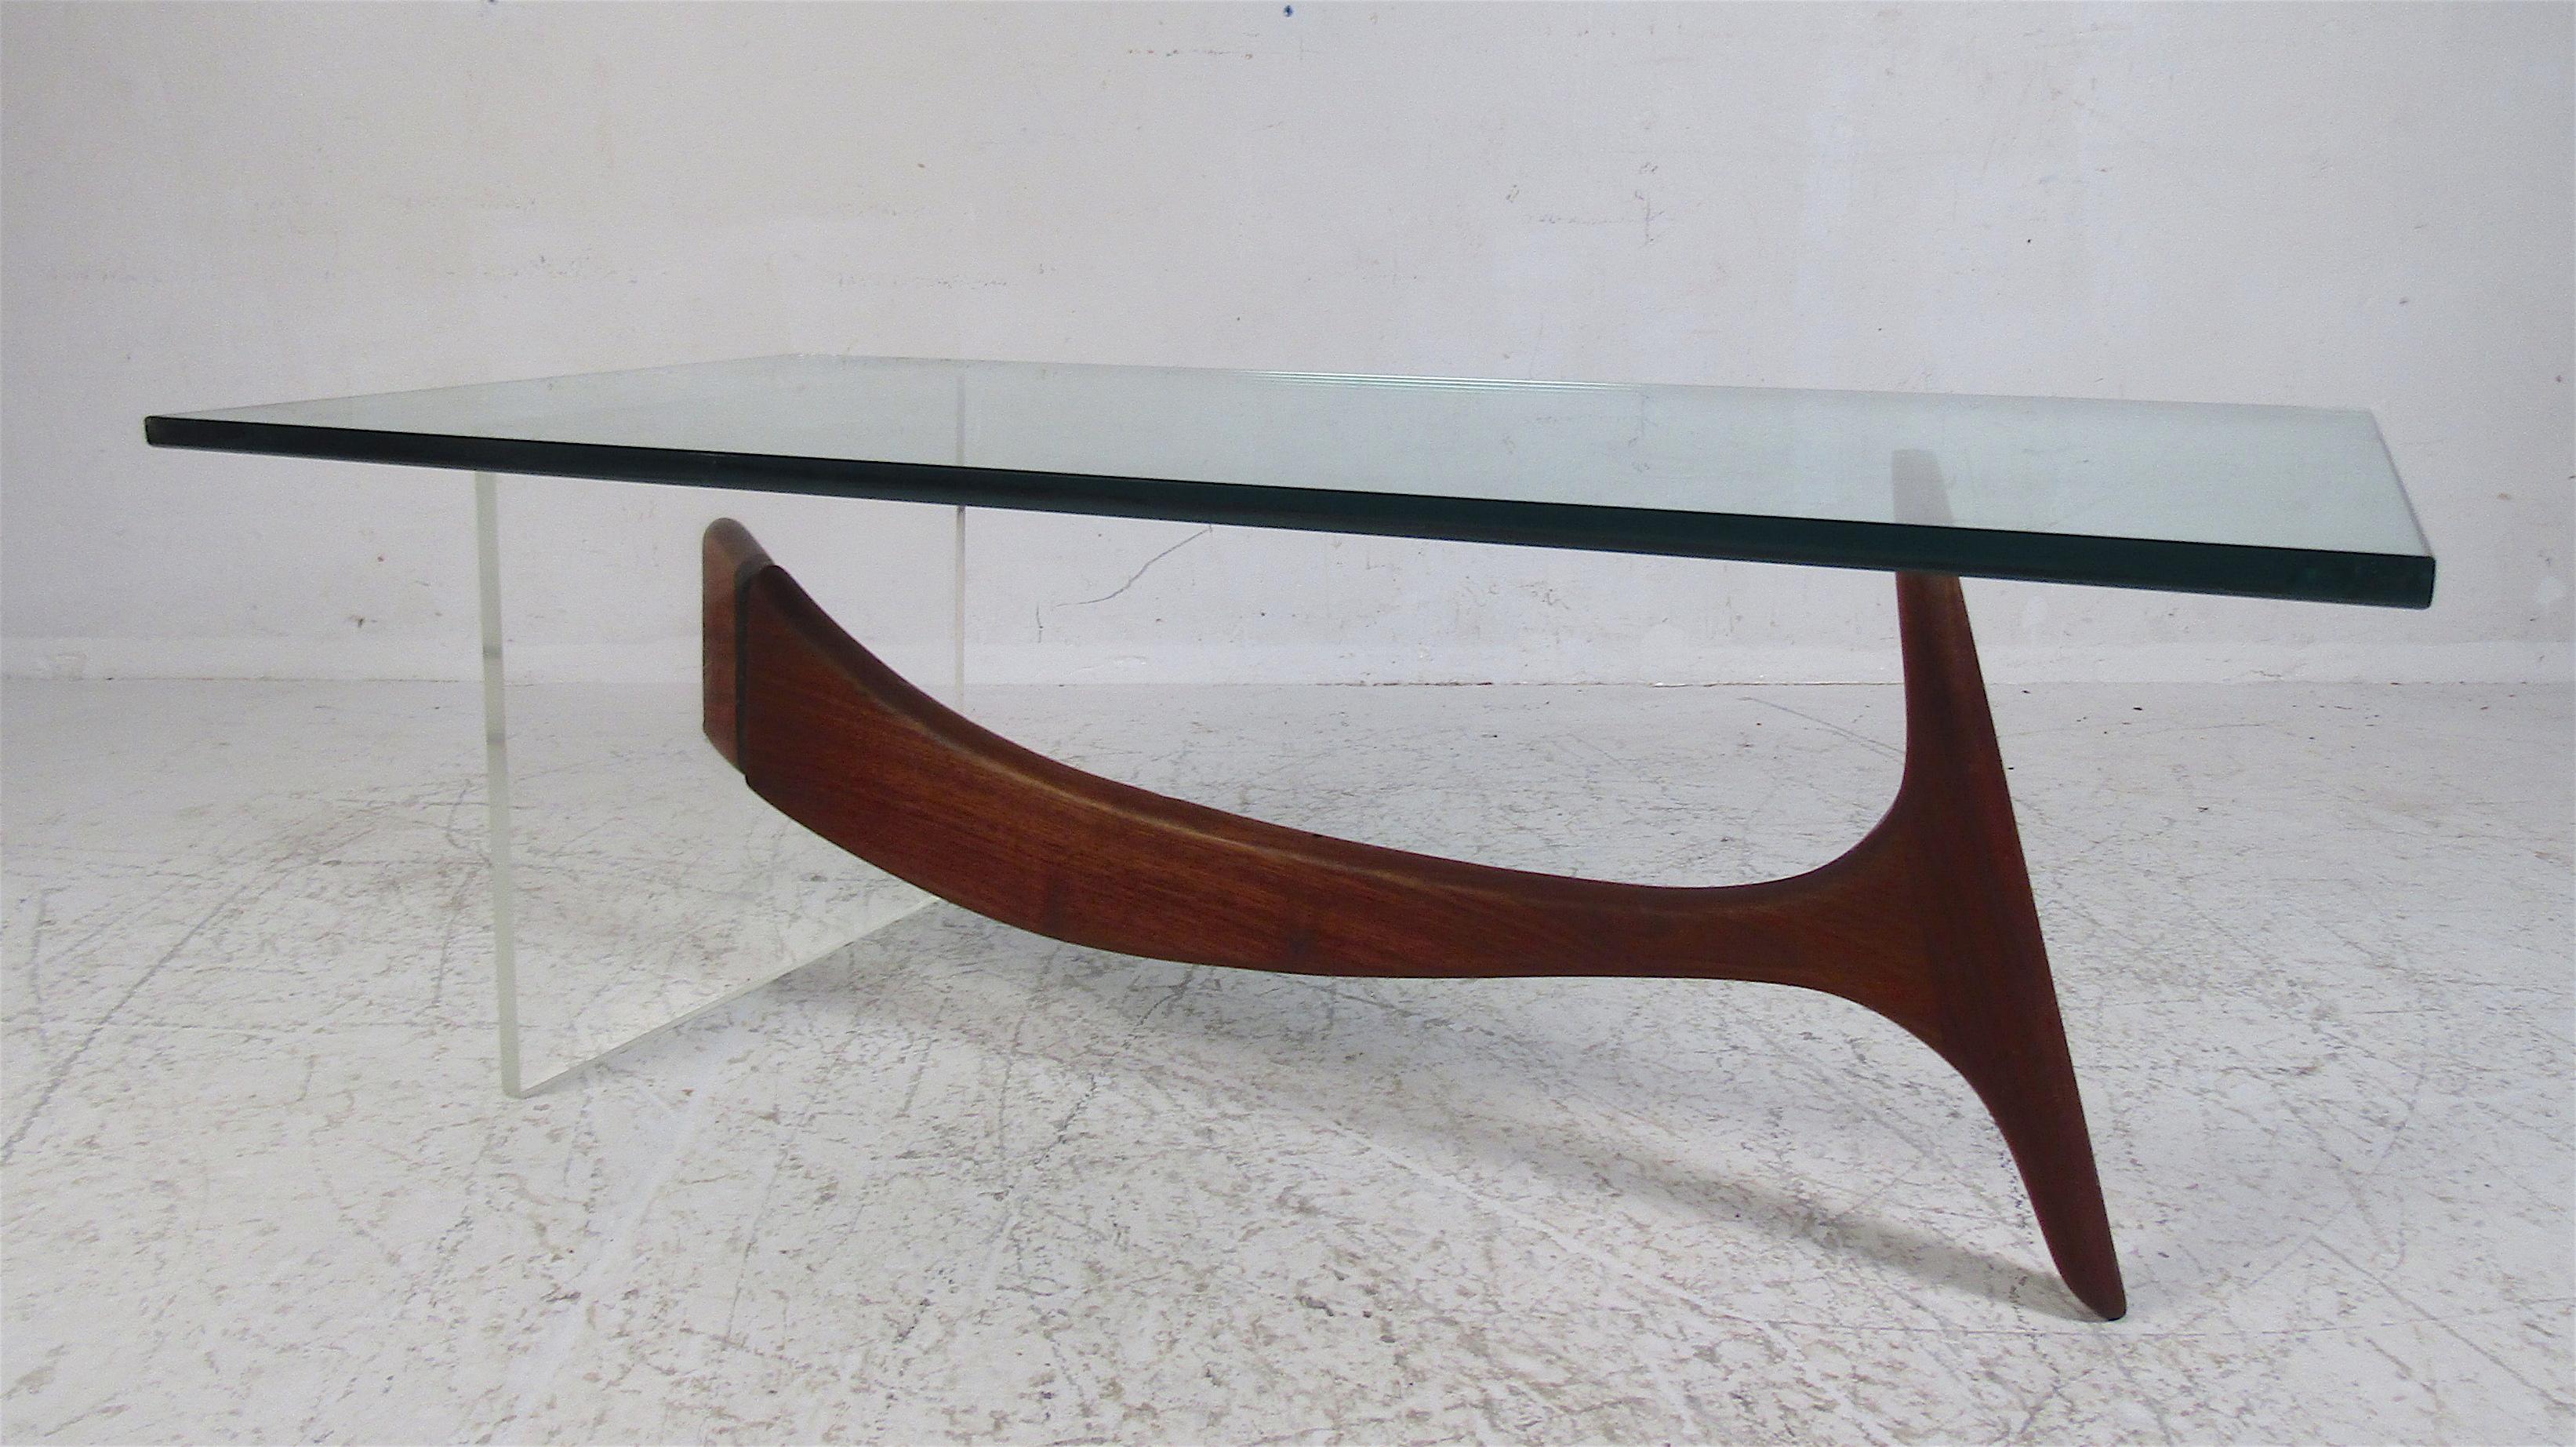 A stunning Mid-Century Modern coffee table that boasts a walnut and Lucite base. The two-tone design is sure to make a lasting impression in any modern interior. The impressive one-inch thick glass top offers plenty of space for setting items. A